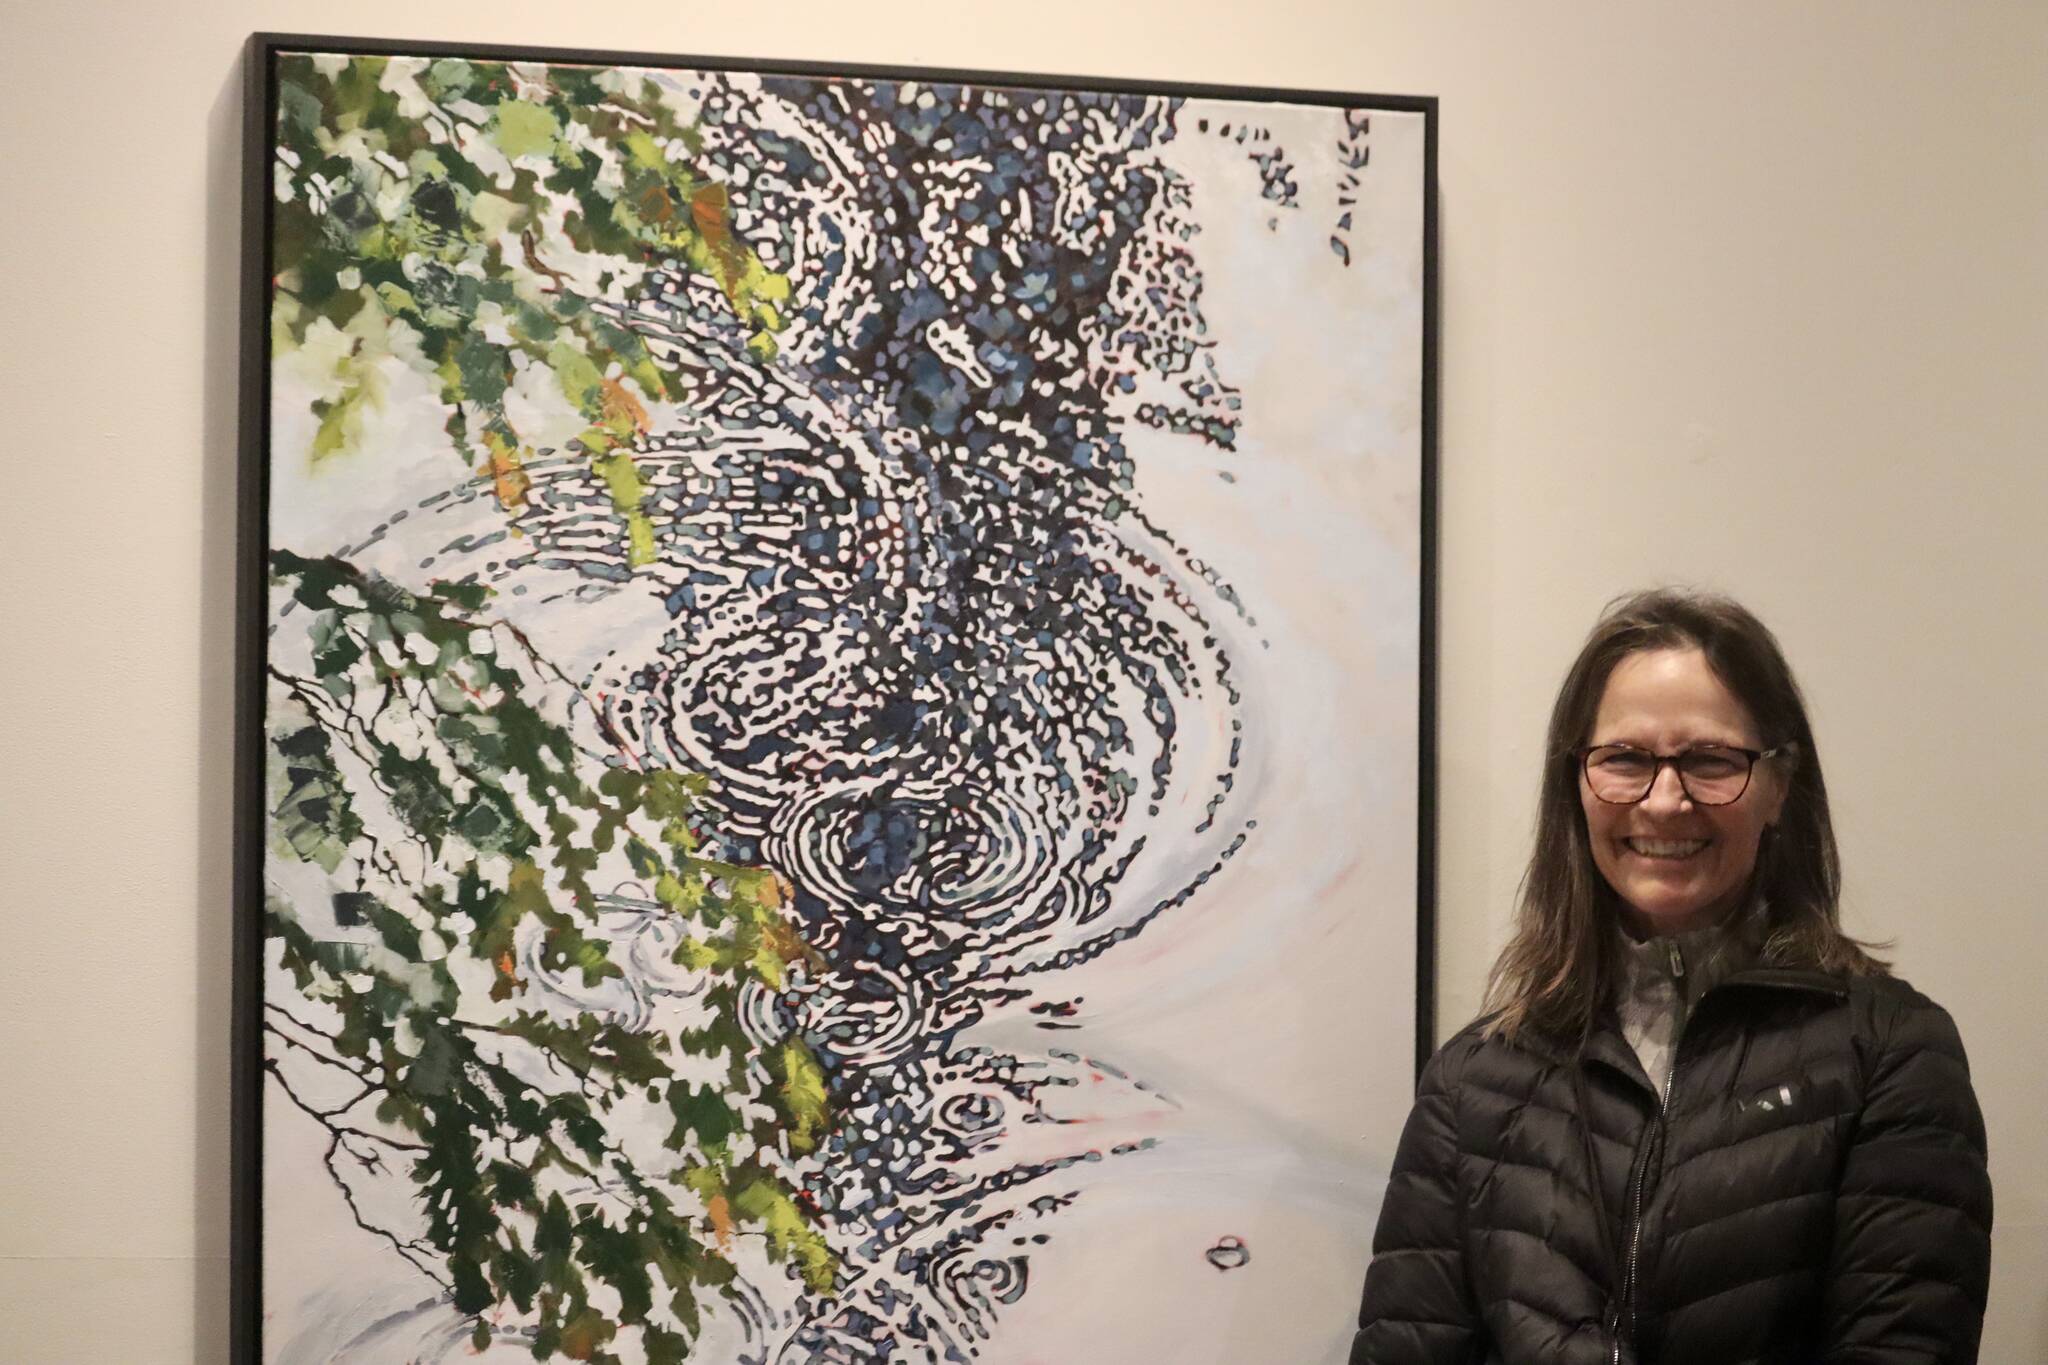 Kerry Kirkpatrick stands by her painting ‘Ripple,’ one of many paintings included within her latest exhibit “Capturing the Light” on display at the Juneau-Douglas City Museum from Nov. 4 through Nov. 26. (Jonson Kuhn / Juneau Empire)